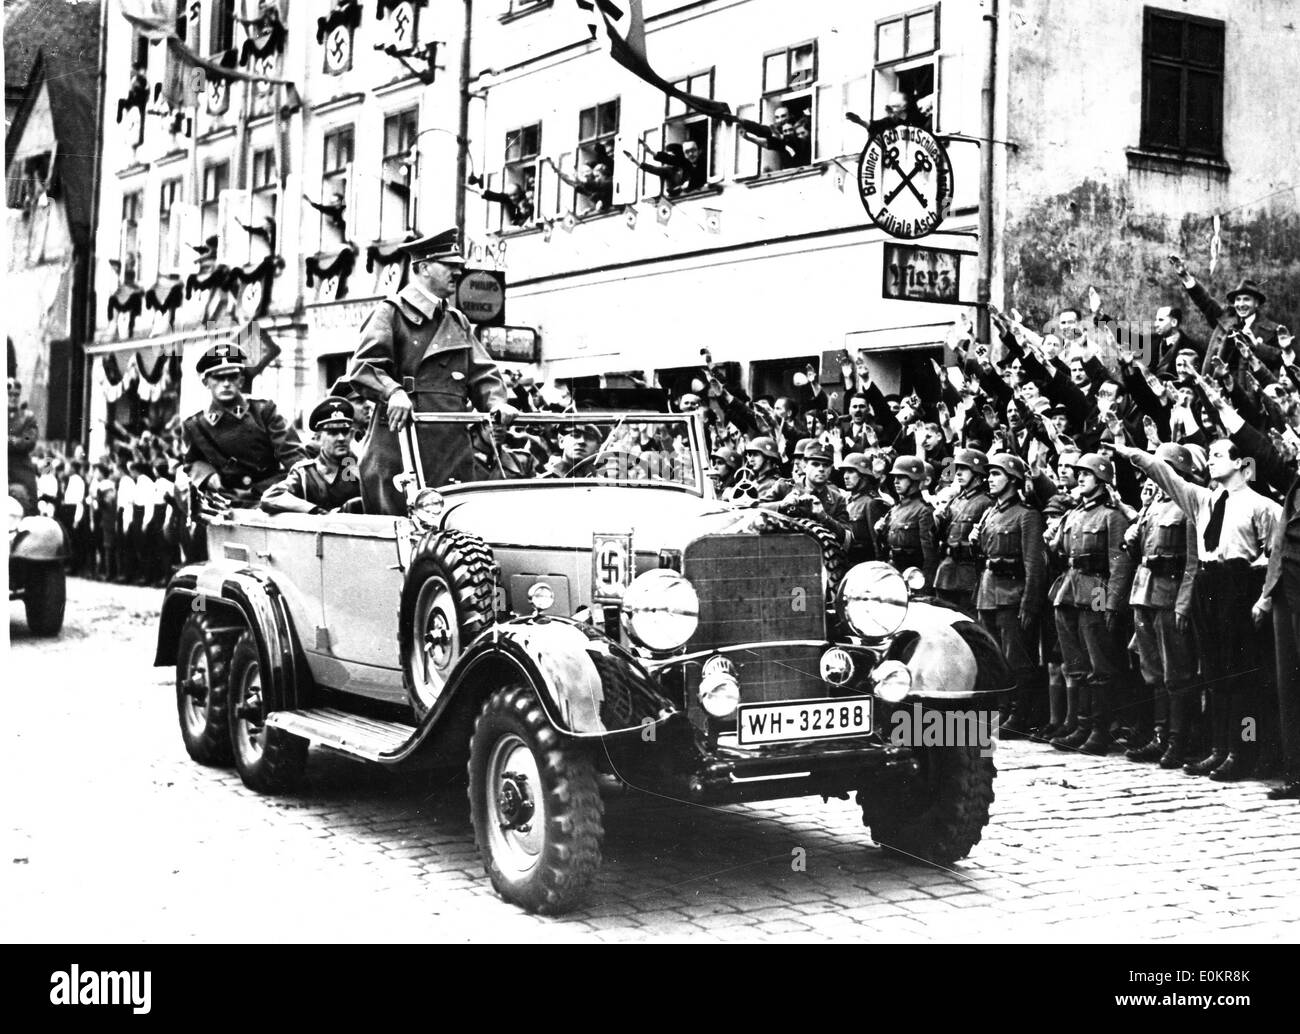 Adolf Hitler being hailed as he rides in a car in Sudetenland Stock Photo